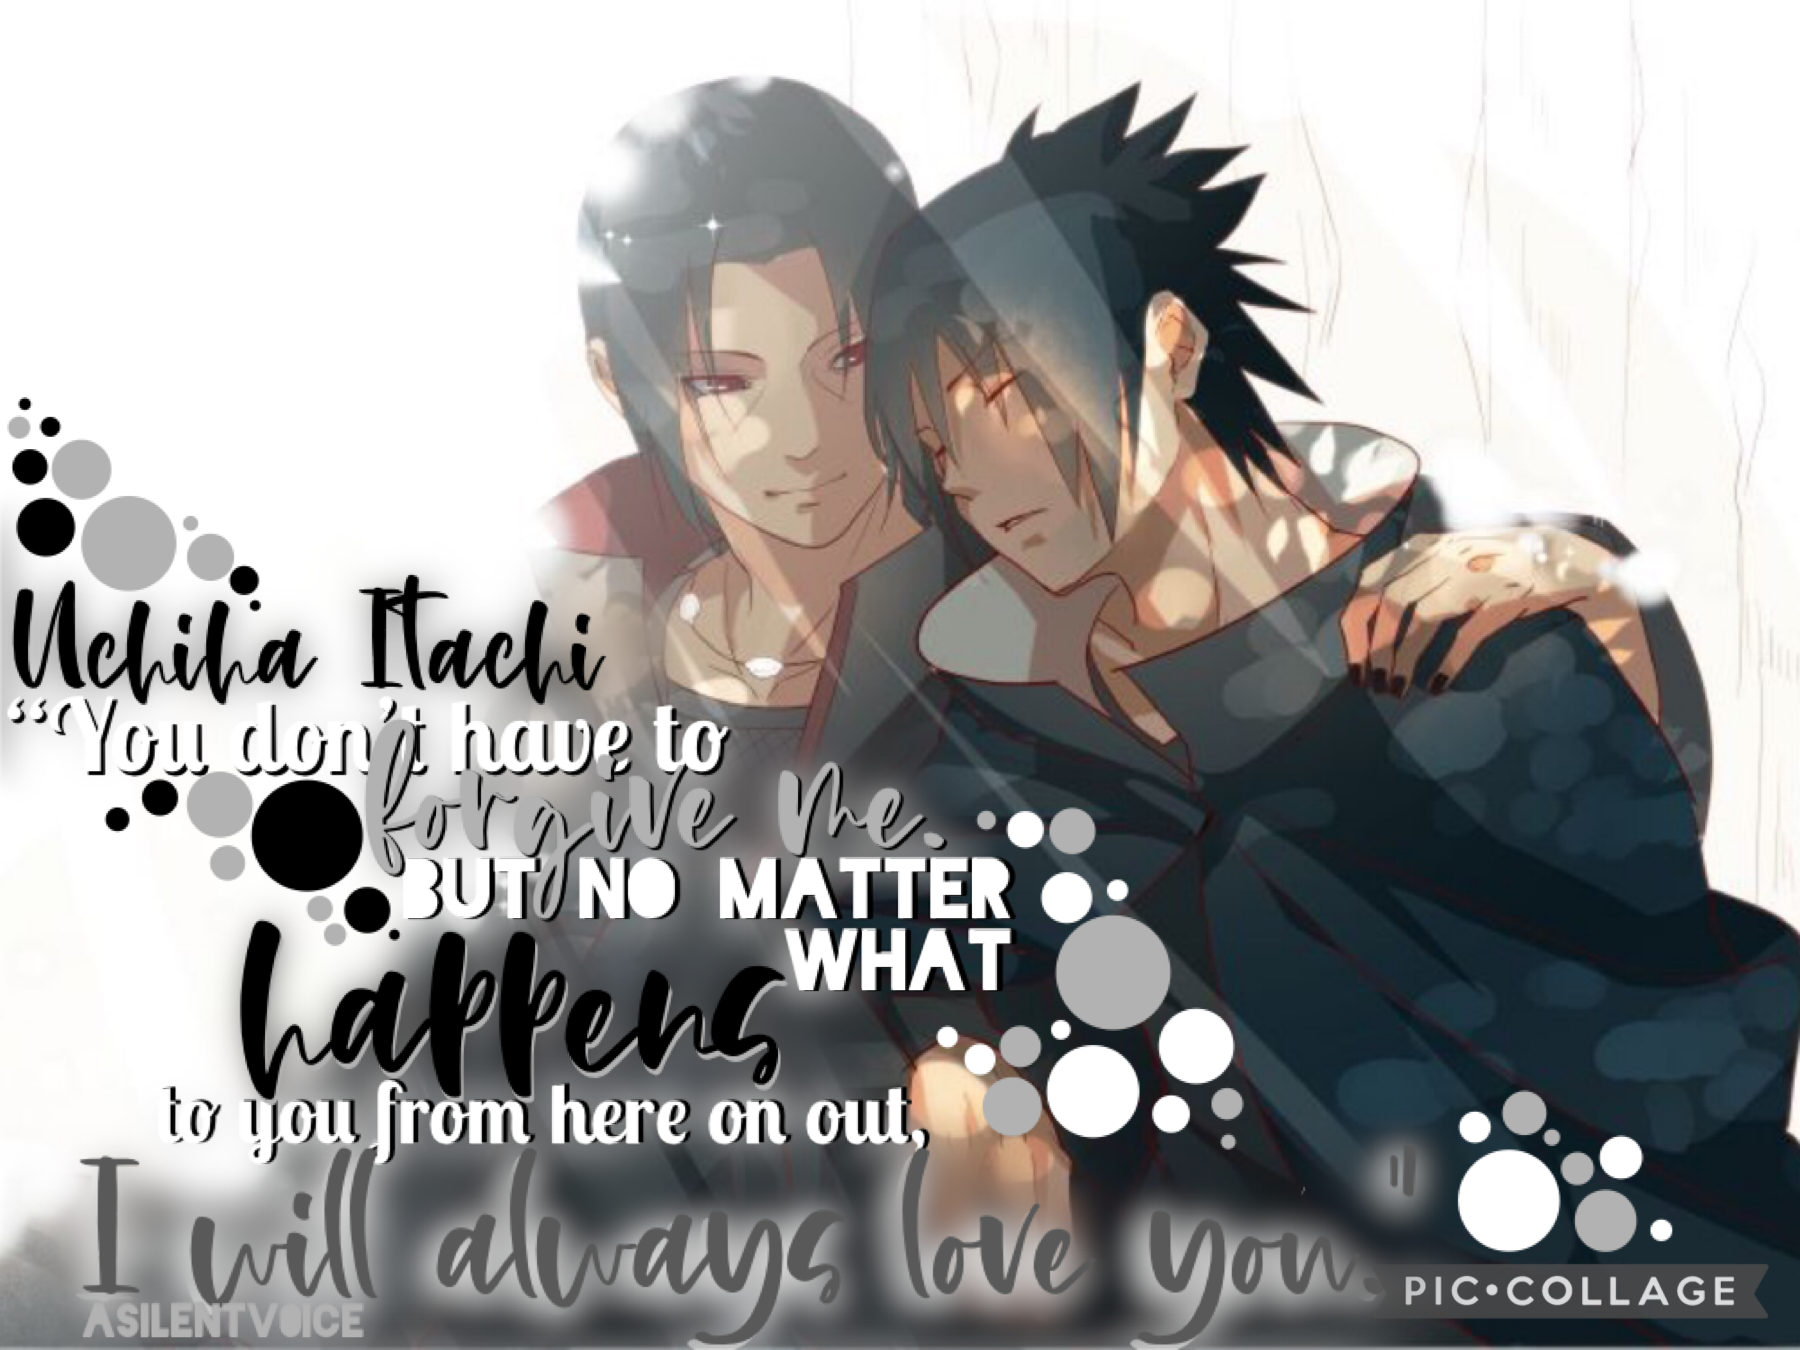 ᎻᎪᏢᏢY ᏴᏆᎡᎢᎻᎠᎪY ᏆᎢᎪᏟᎻᏆ!!!


Itachi’s death and back story was so sad! And he is my favorite character in the series, anyone else? Rest In Peace Uchiha Itachi.

July 9th